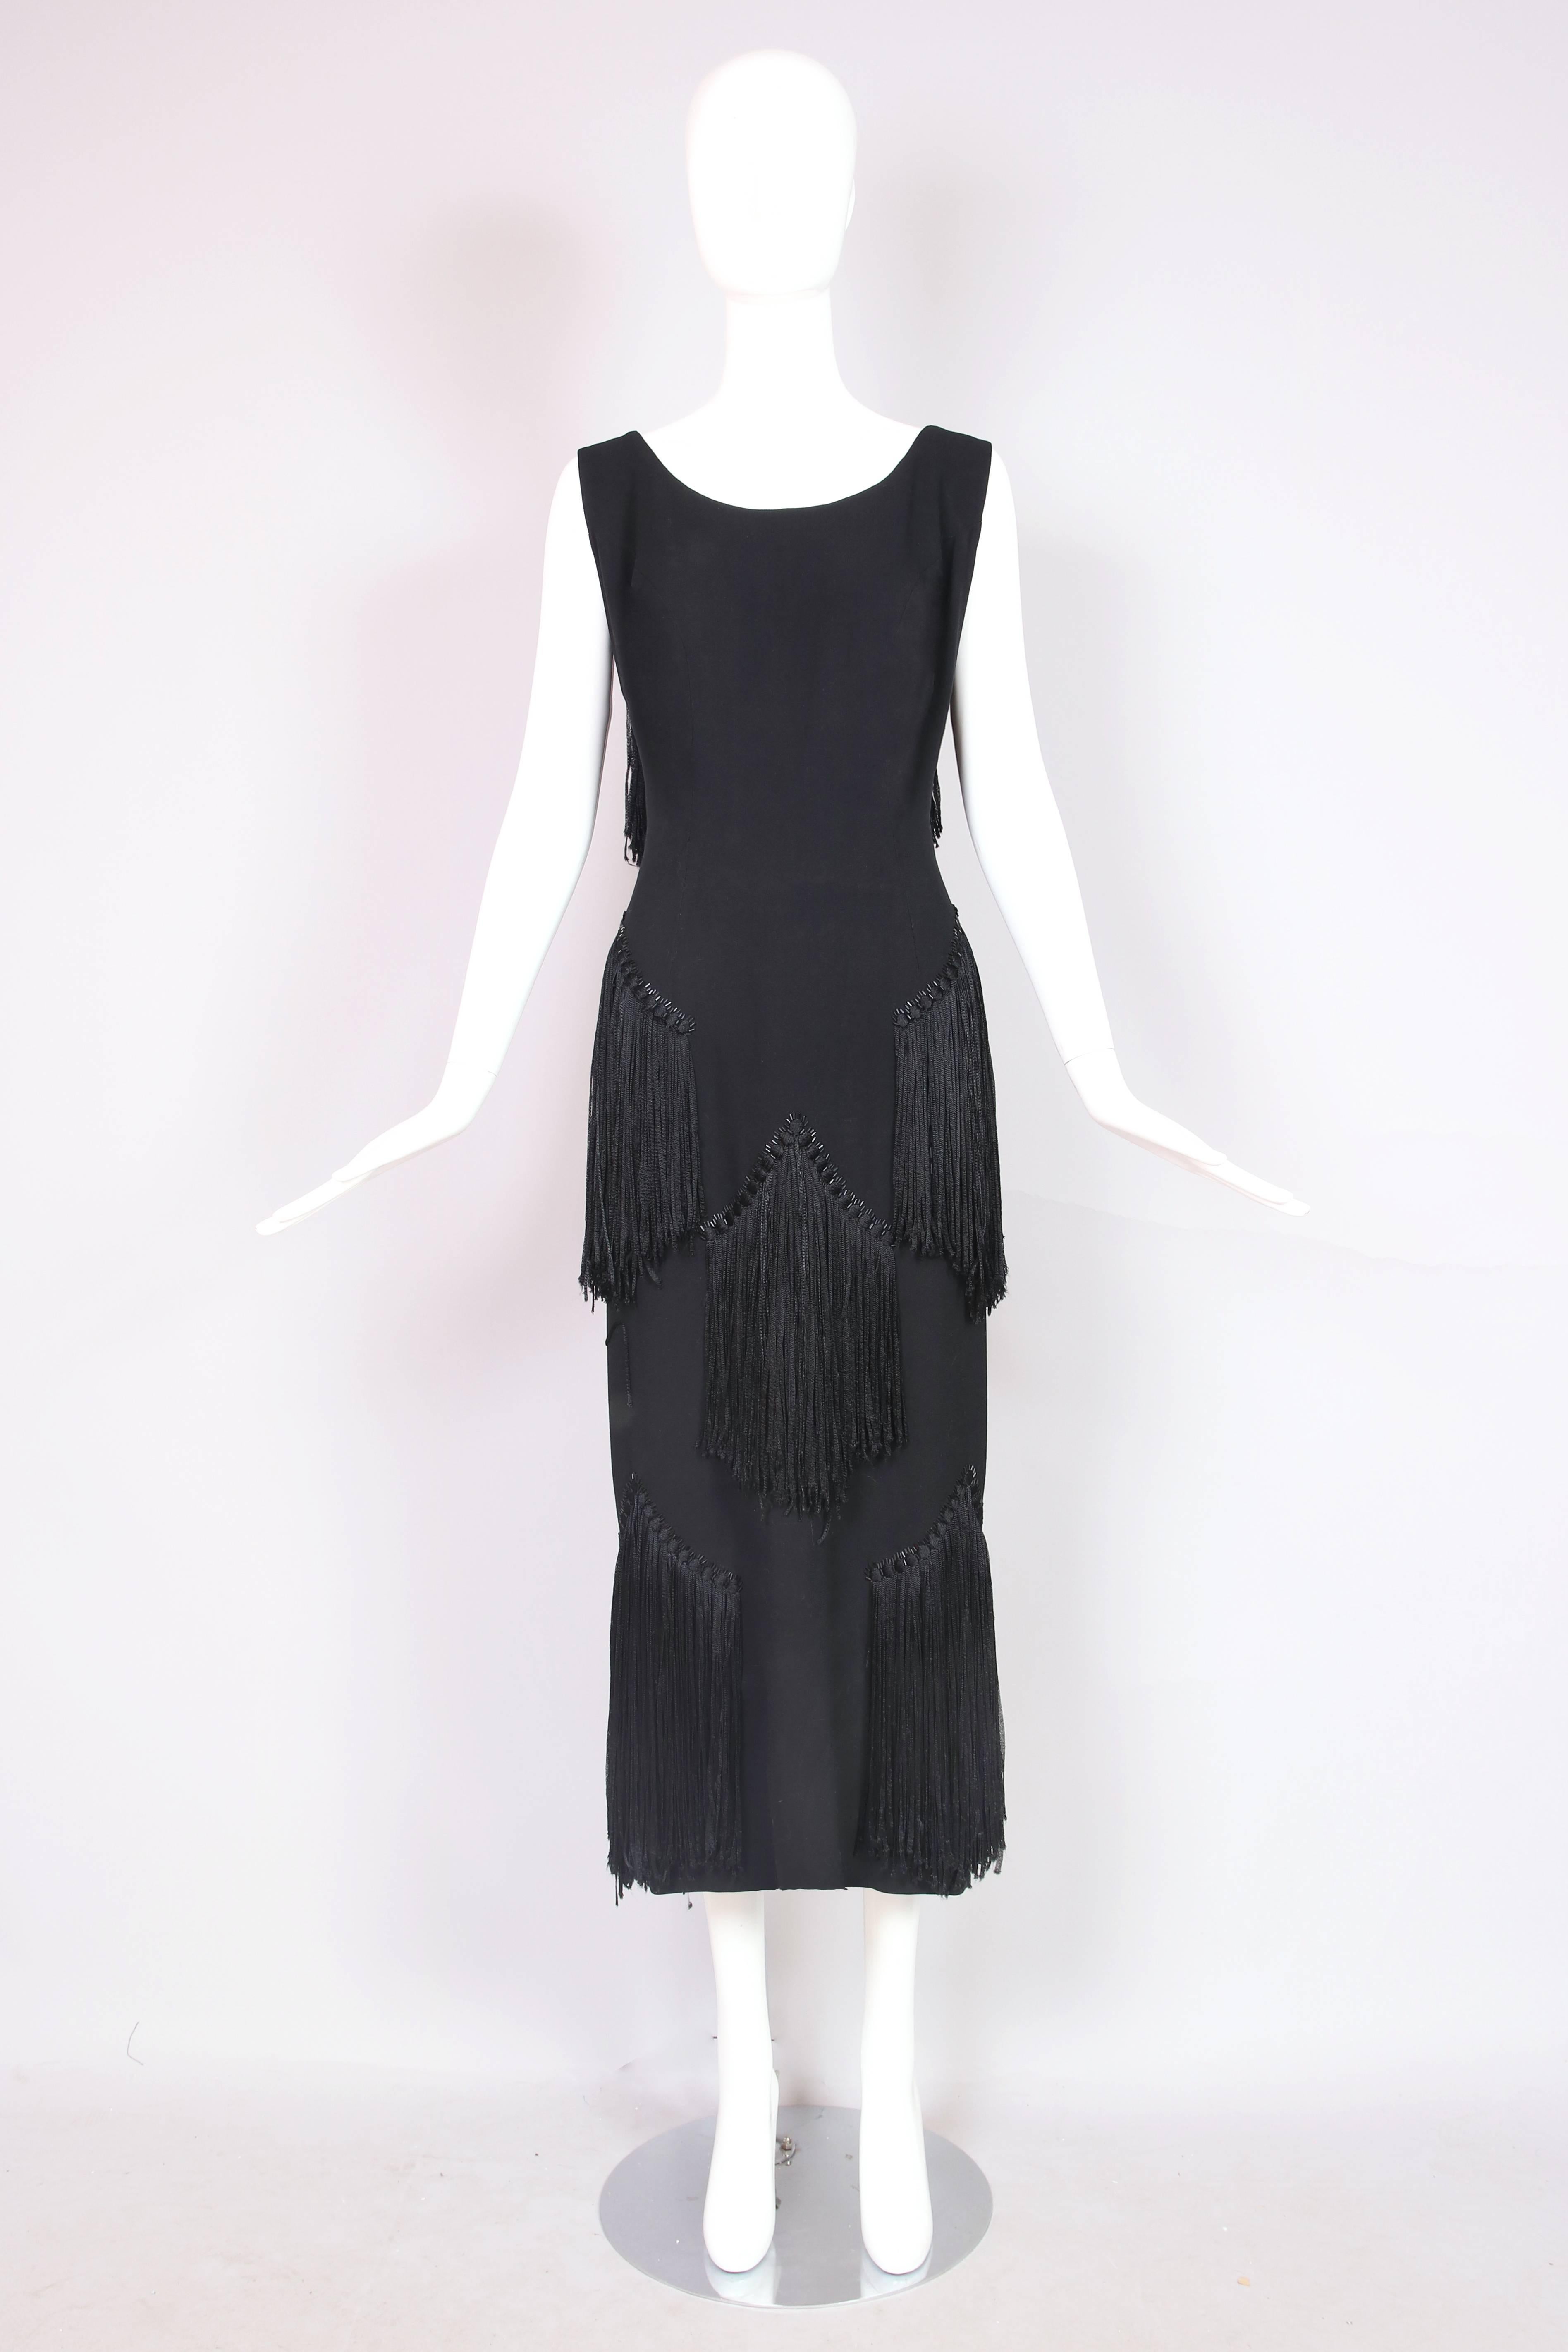 1940's House of Worth sleeveless black wool crepe dress with subtle scooped neckline, V-back and long black silk fringe panels and bugle beading detail. In excellent condition with one tiny start to a hole on the front bodice and minor wear to the